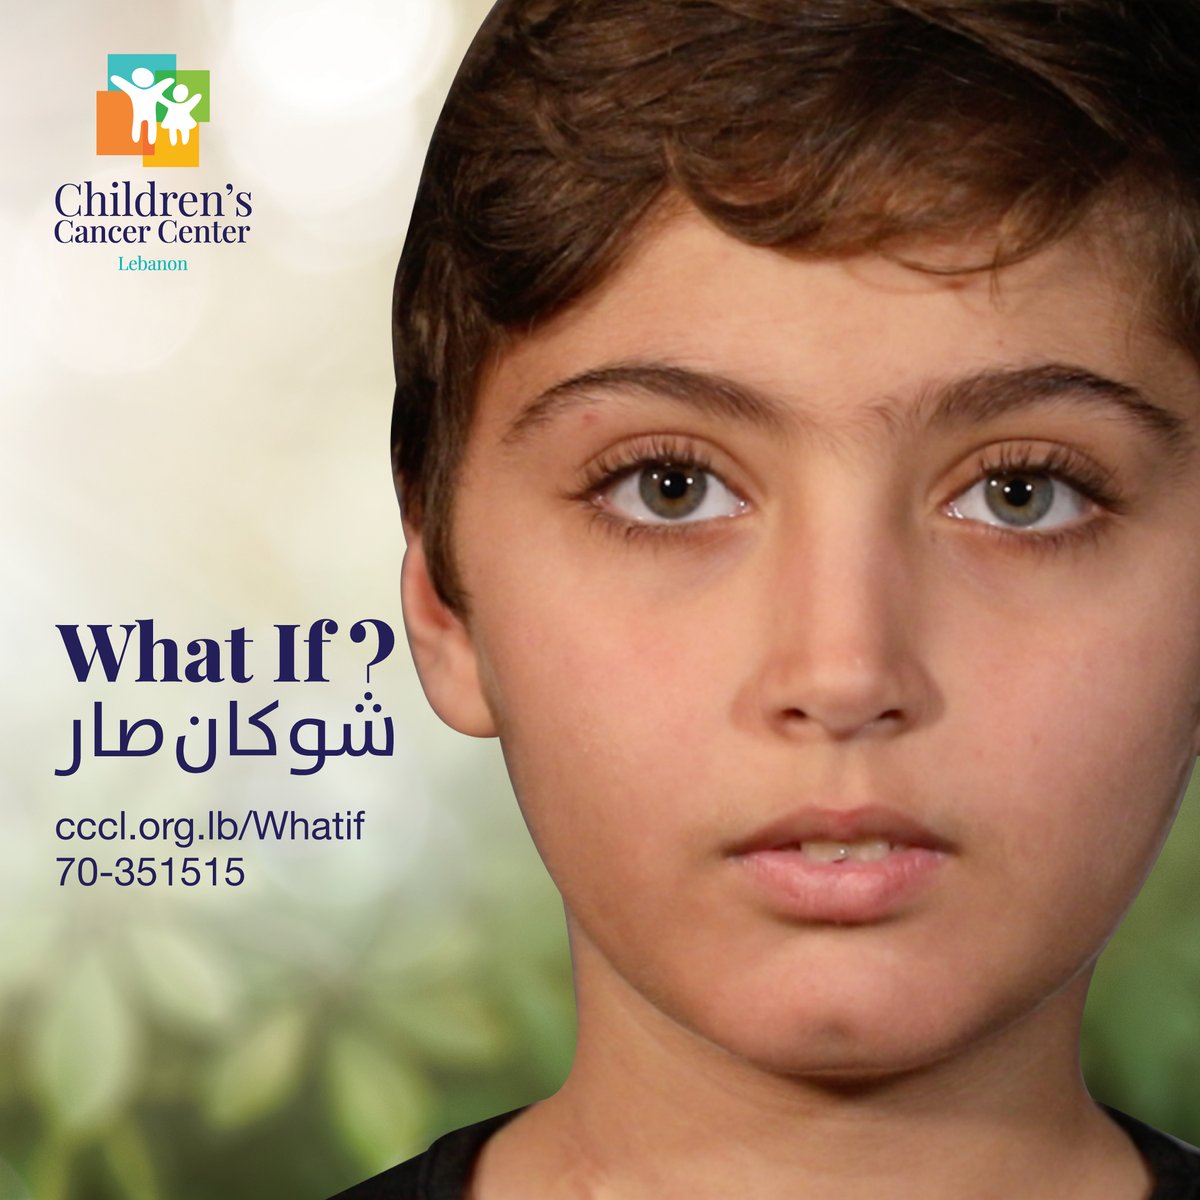 What if Wissam's smile returns? You can be the reason behind it! Donate now loom.ly/PIar4sI. #CCCL #WhatIf #iLoveCCCL #SavingLives_CelebratingHope #UnitedAgainstCancer